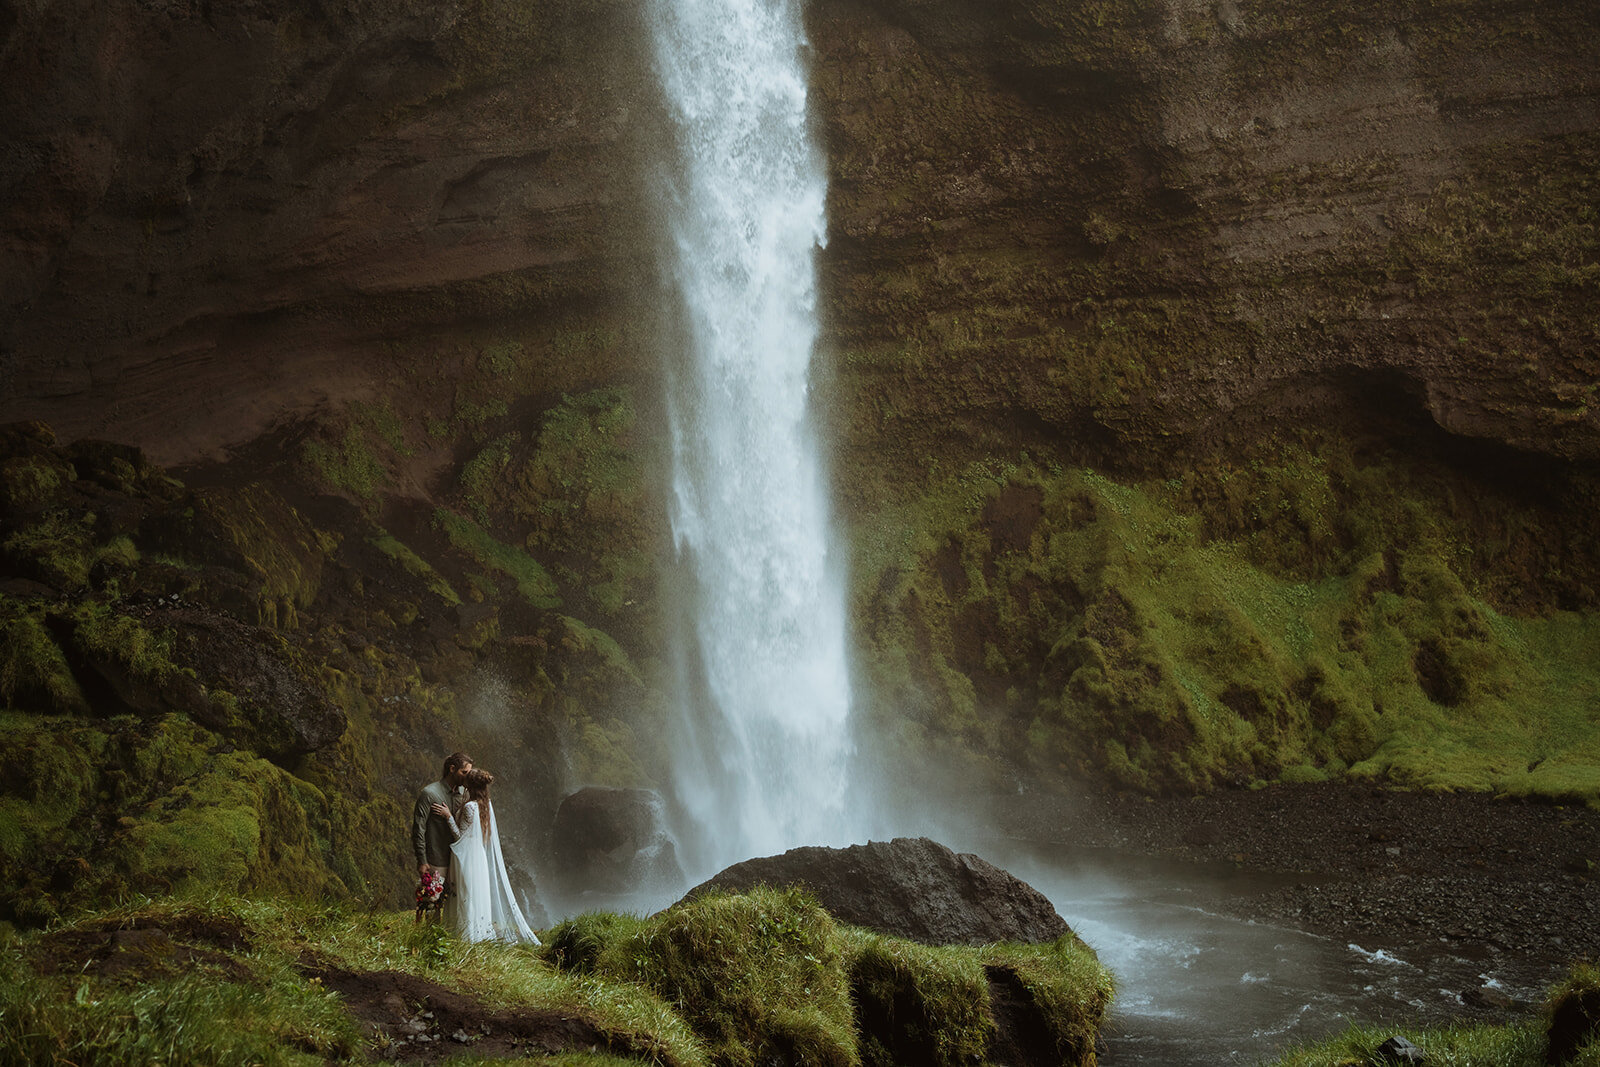 the bride and groom are at the base of a waterfall in greenery. they are kissing each other as the waterfall is cascading down behind them in the columbia river gorge.